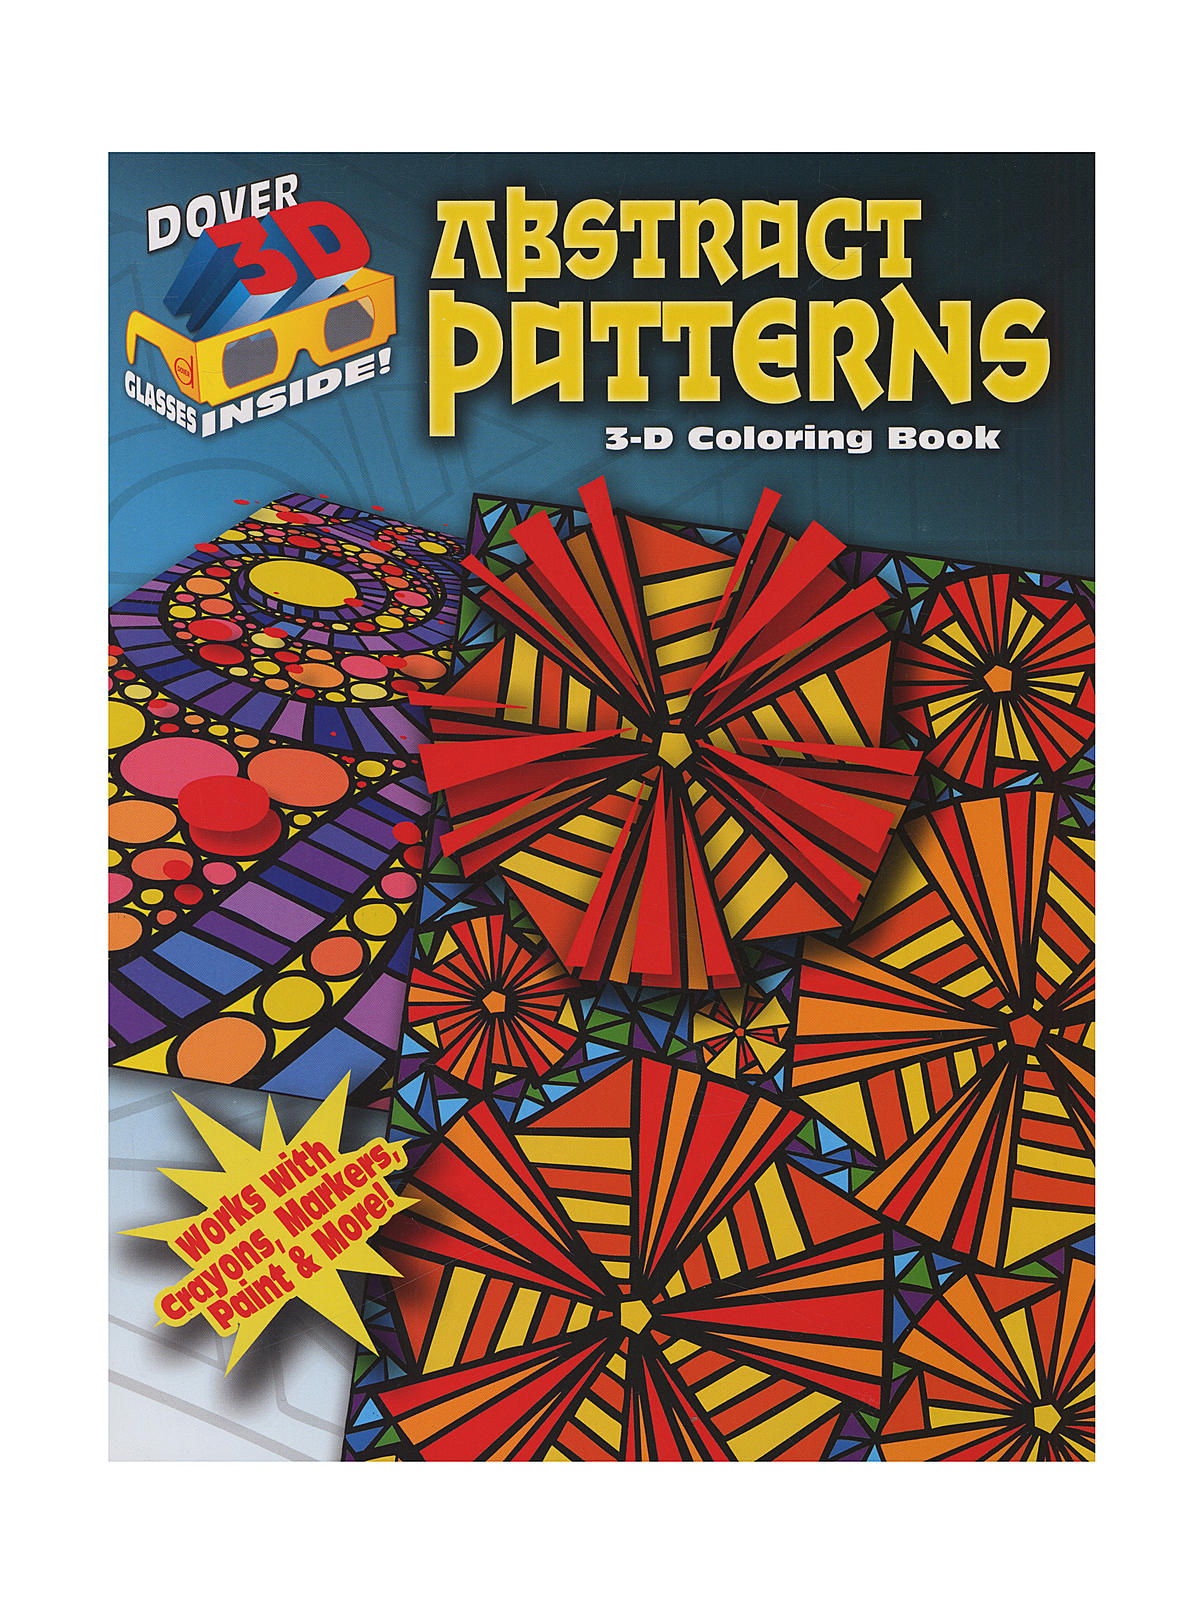 3-d Coloring Book Abstract Patterns